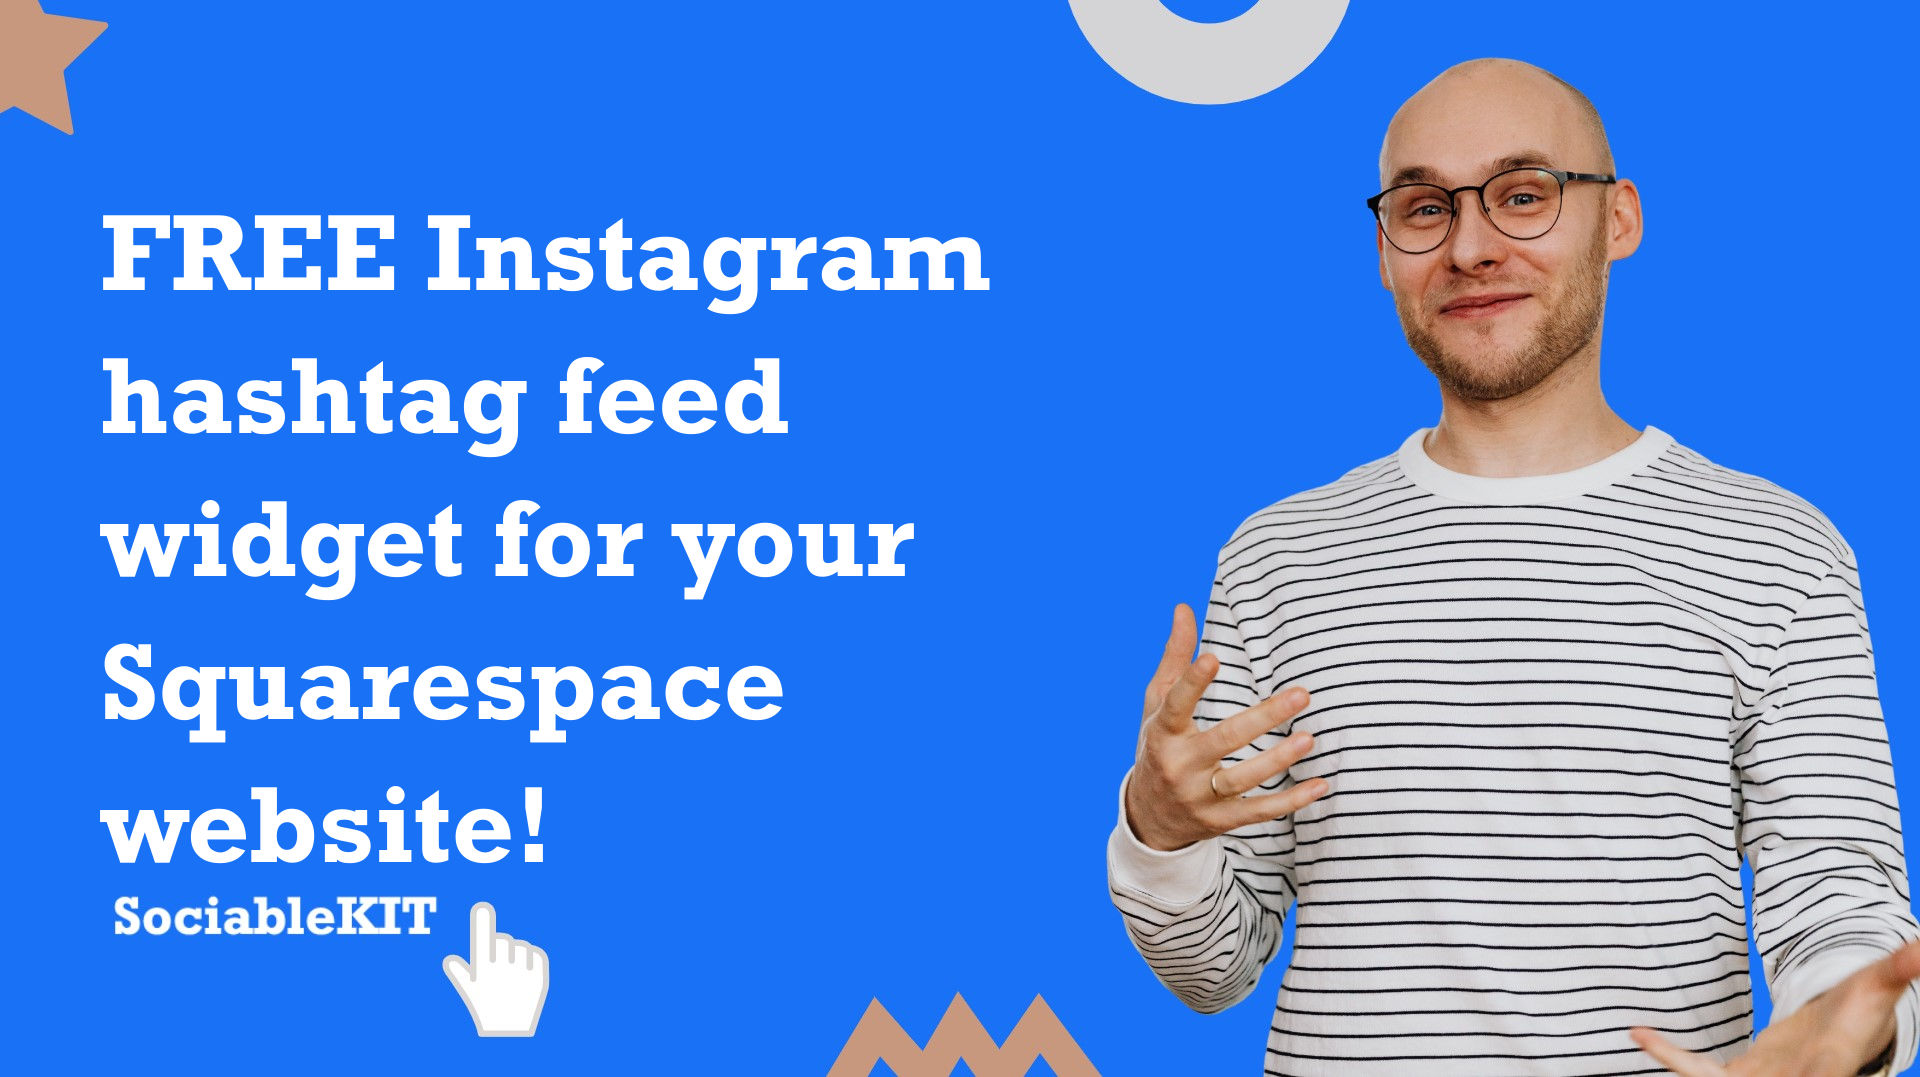 Free Instagram hashtag feed widget for your Squarespace website